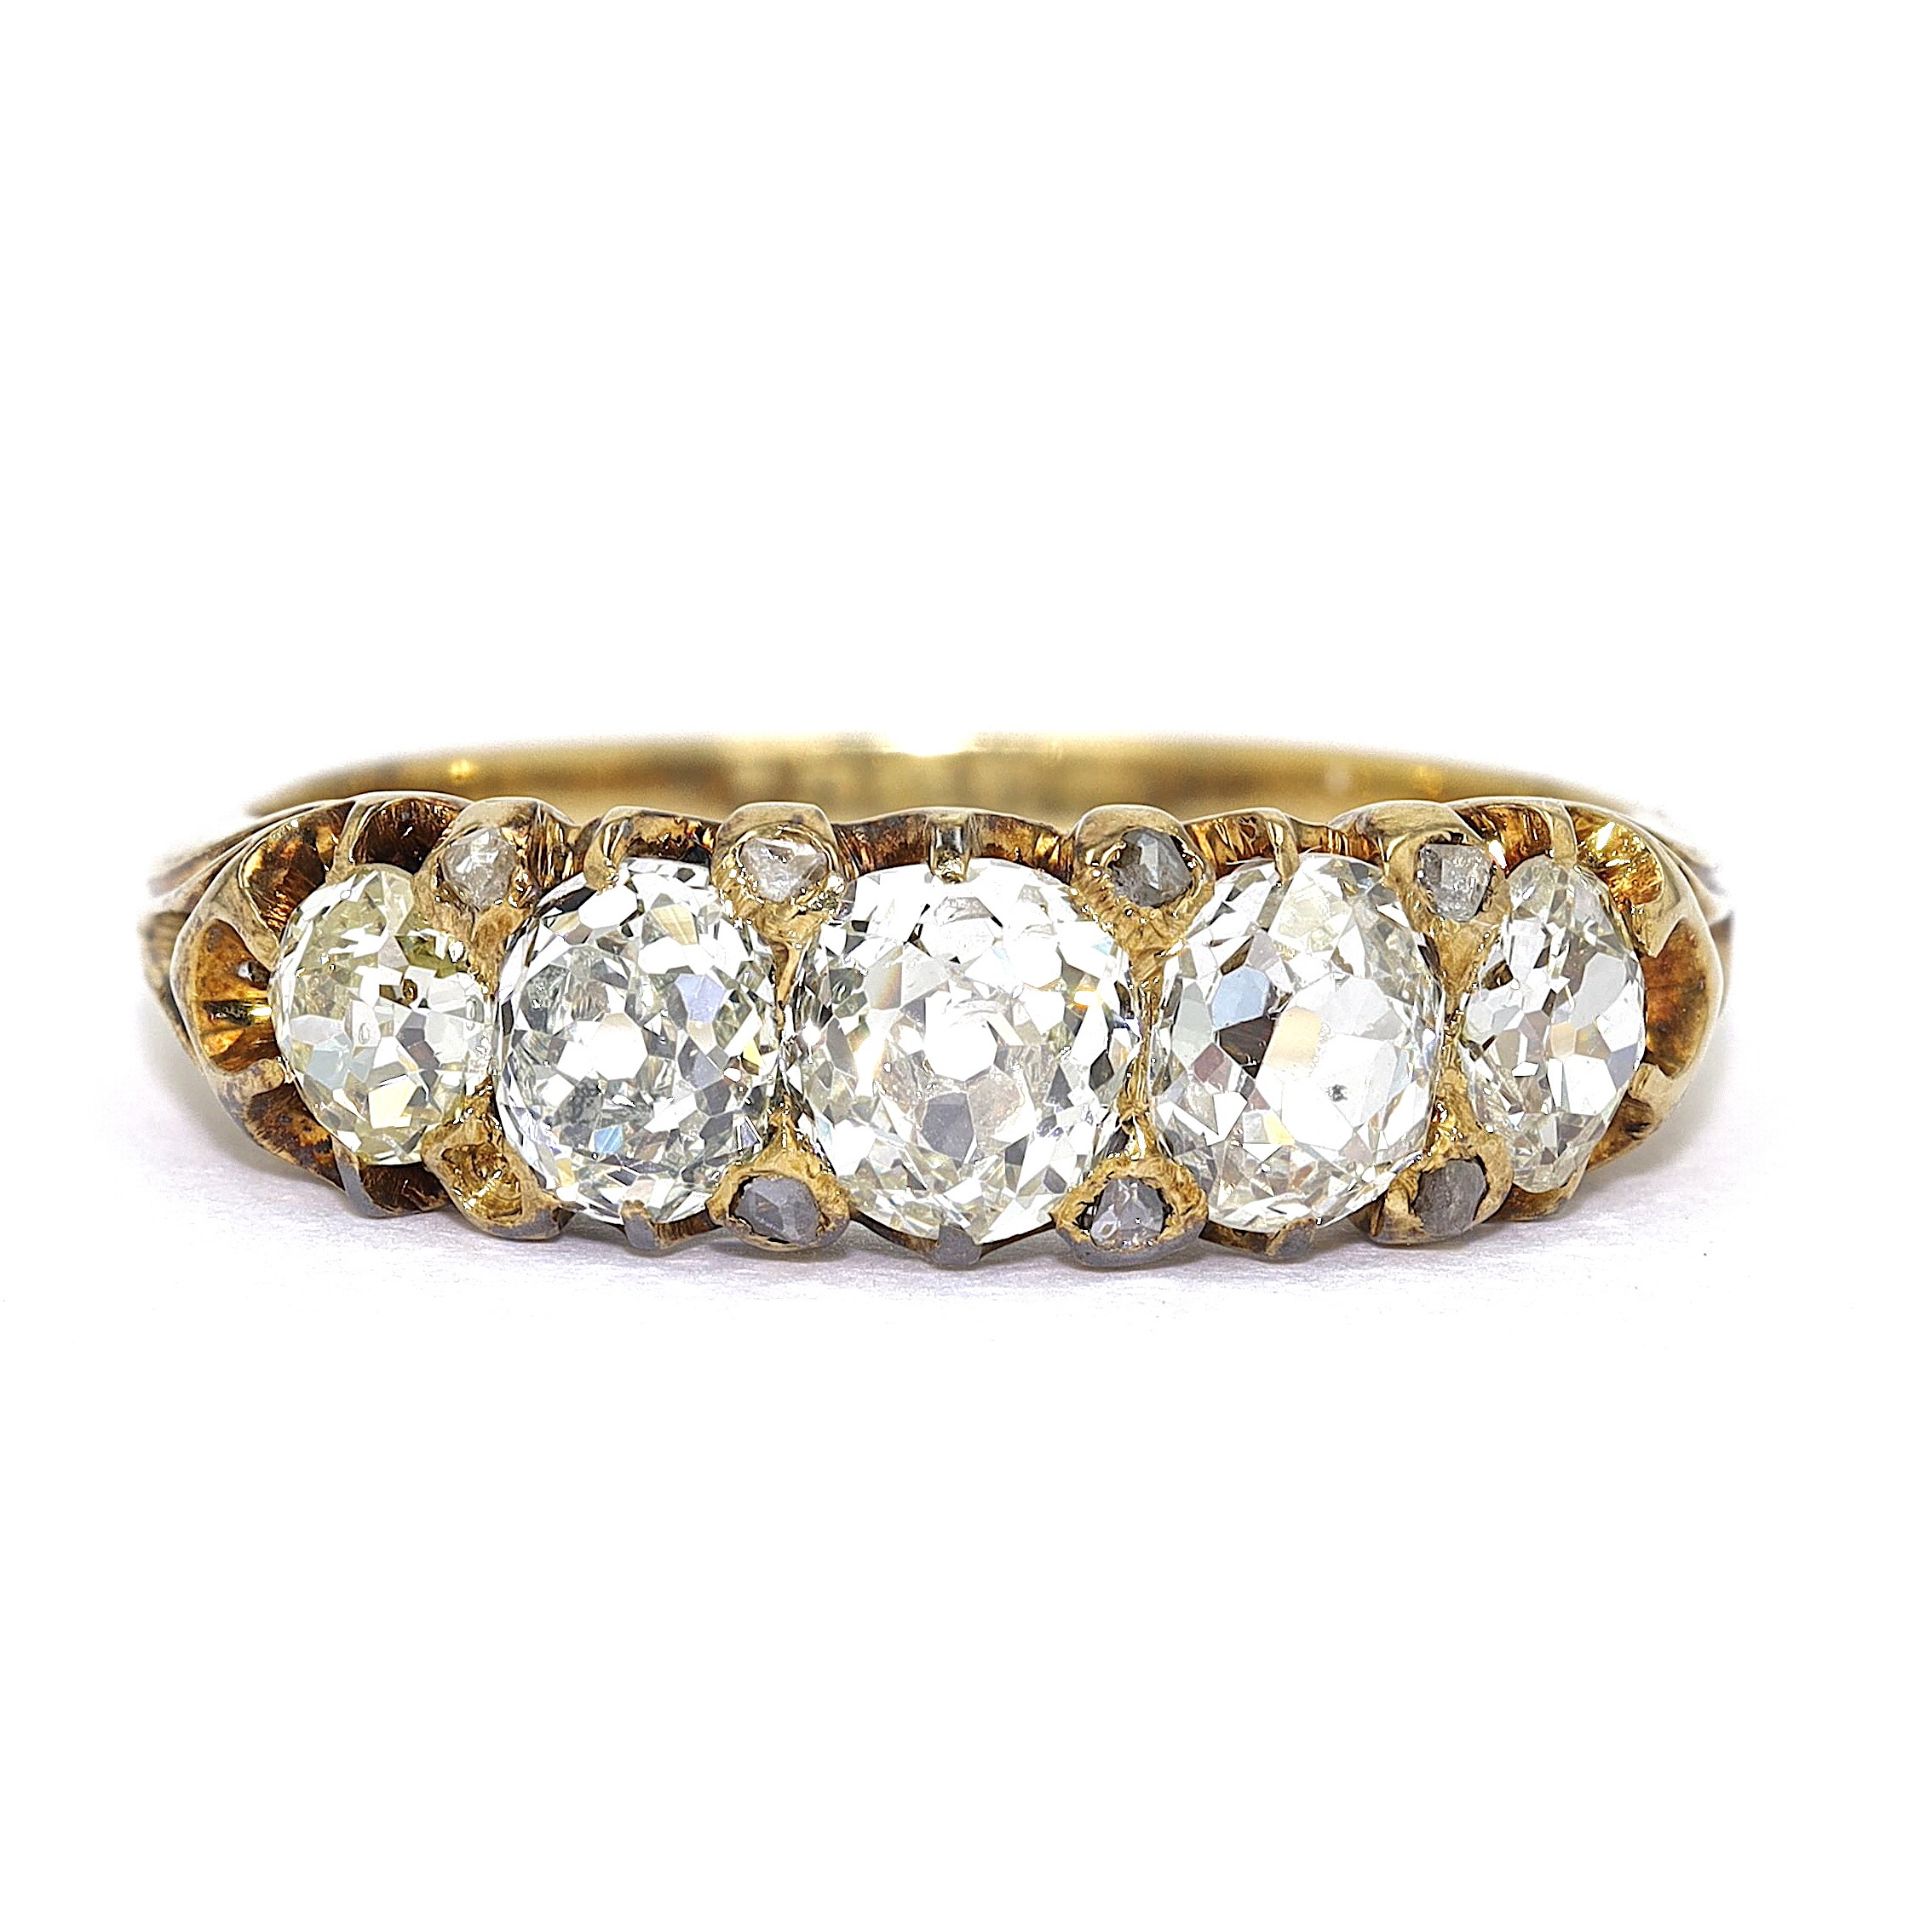 Ring ca. 750 gold with ca. 1,15 ct diamonds